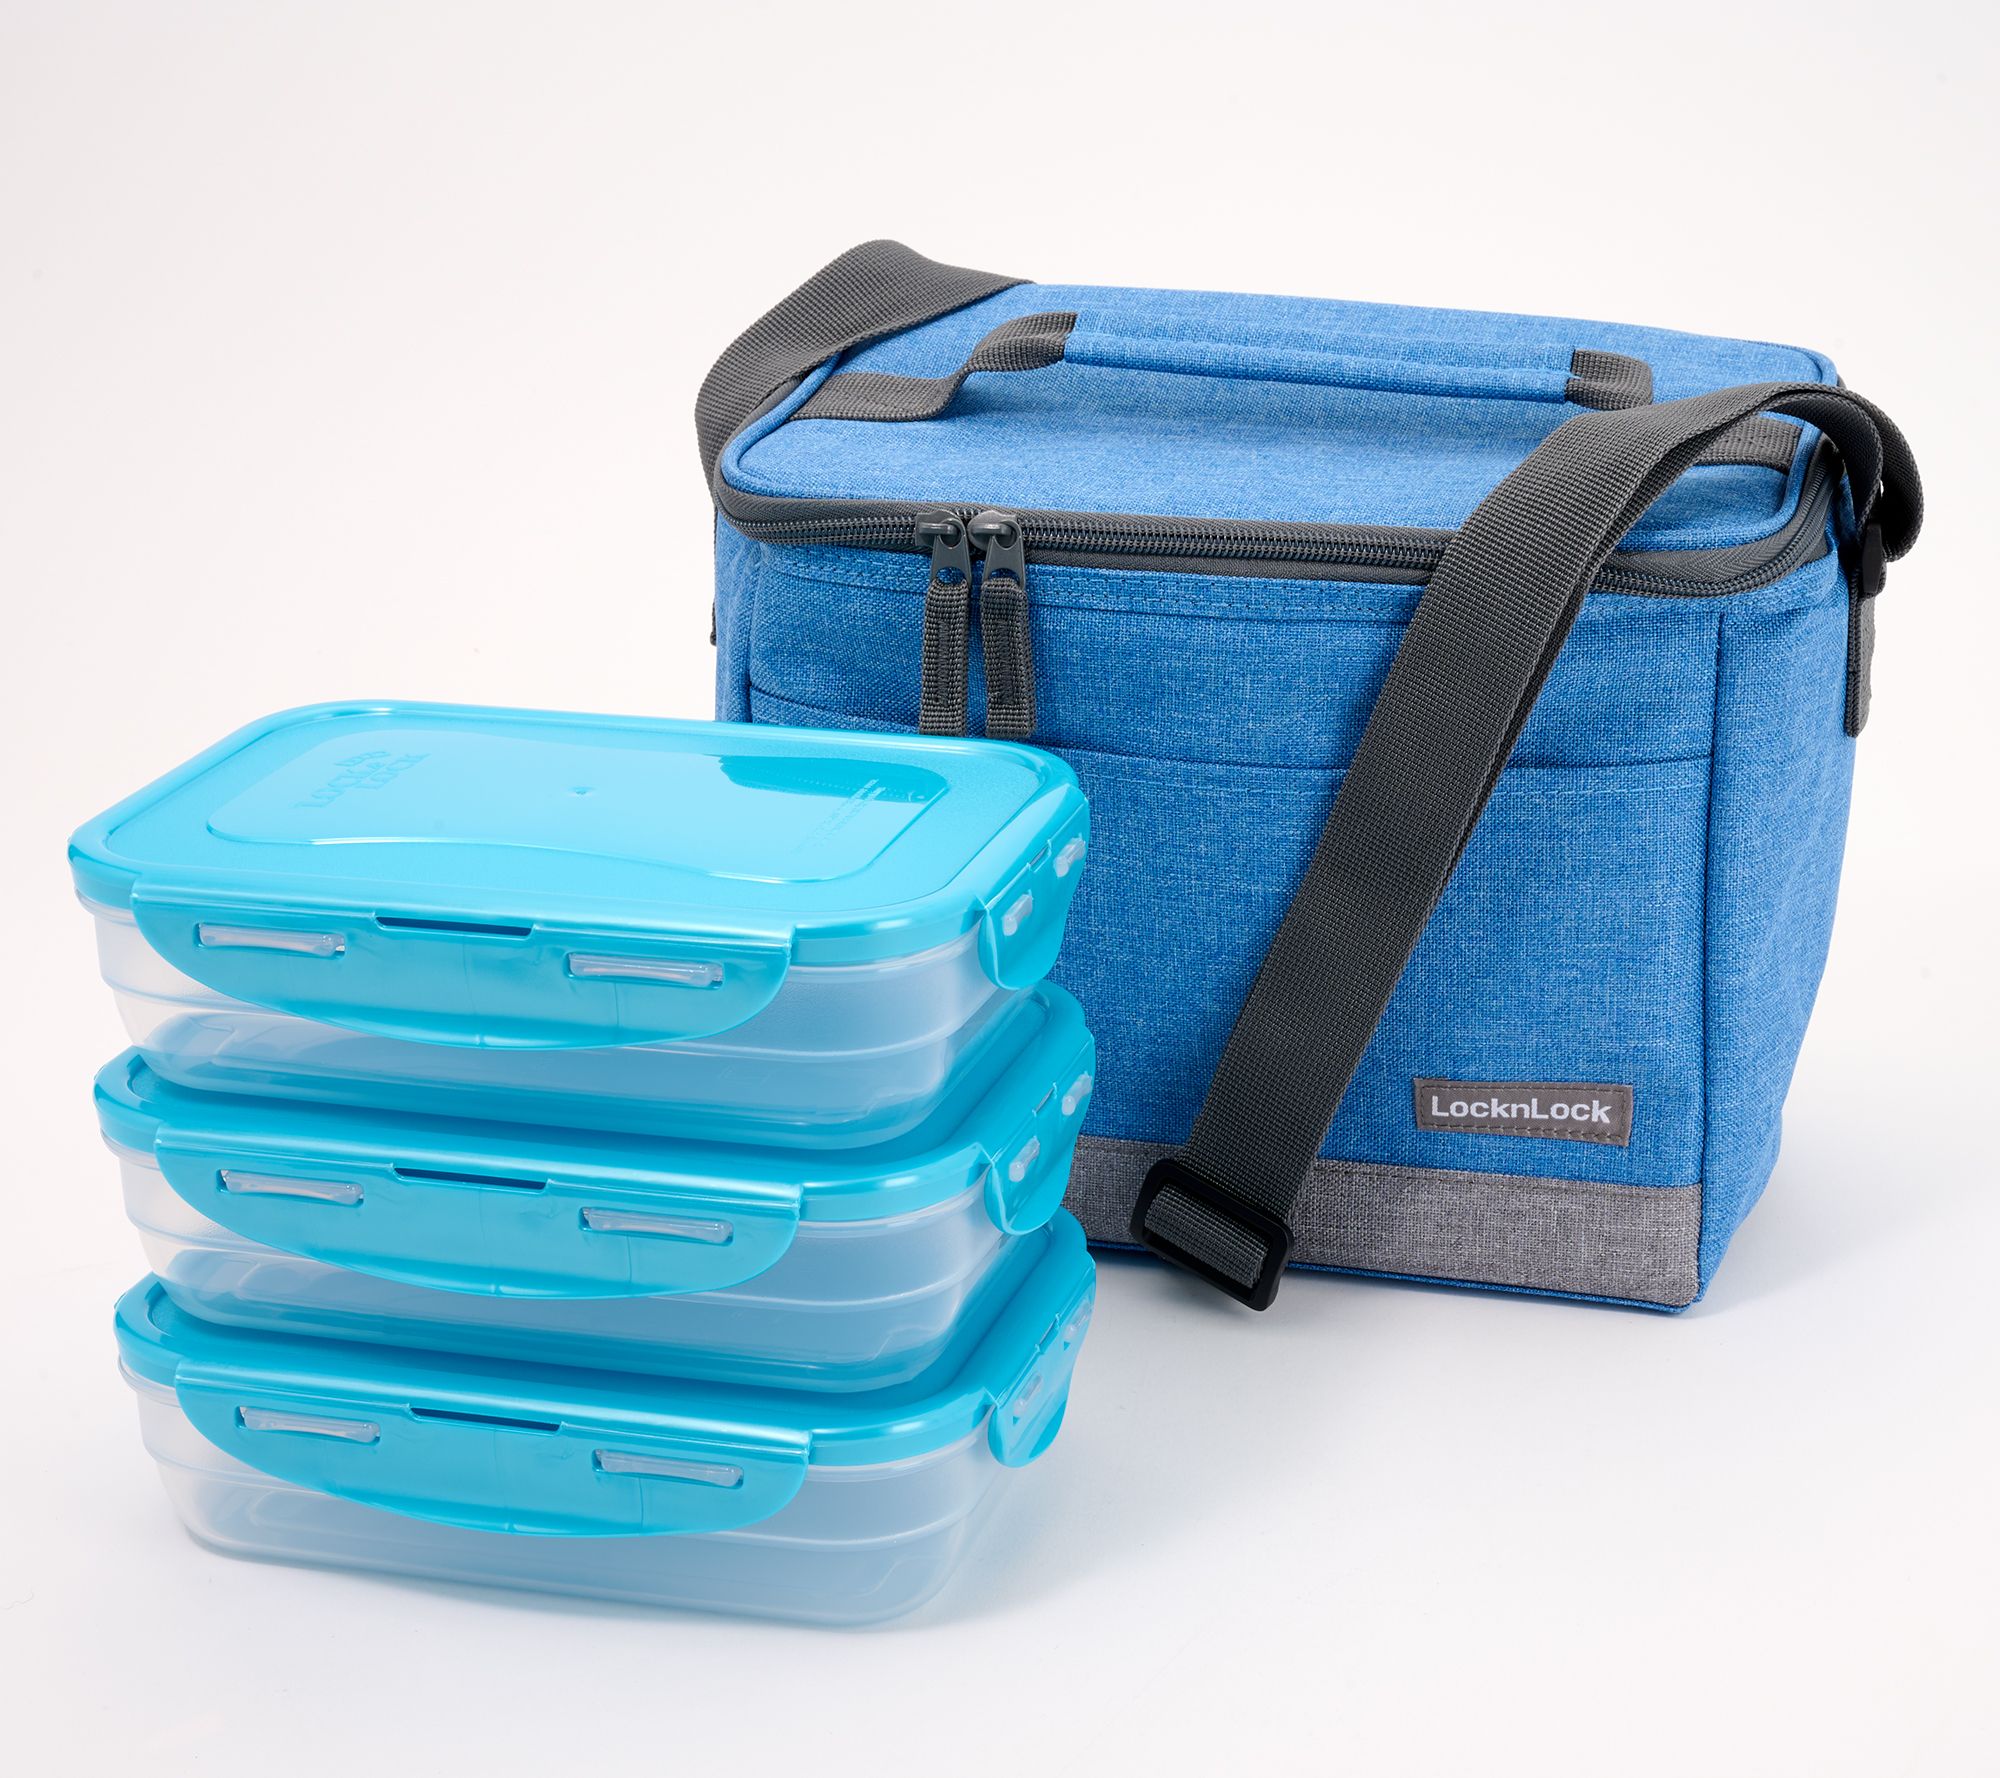 3PCS Bento Box Adult Lunch Box Containers For Toddler Kids Adults